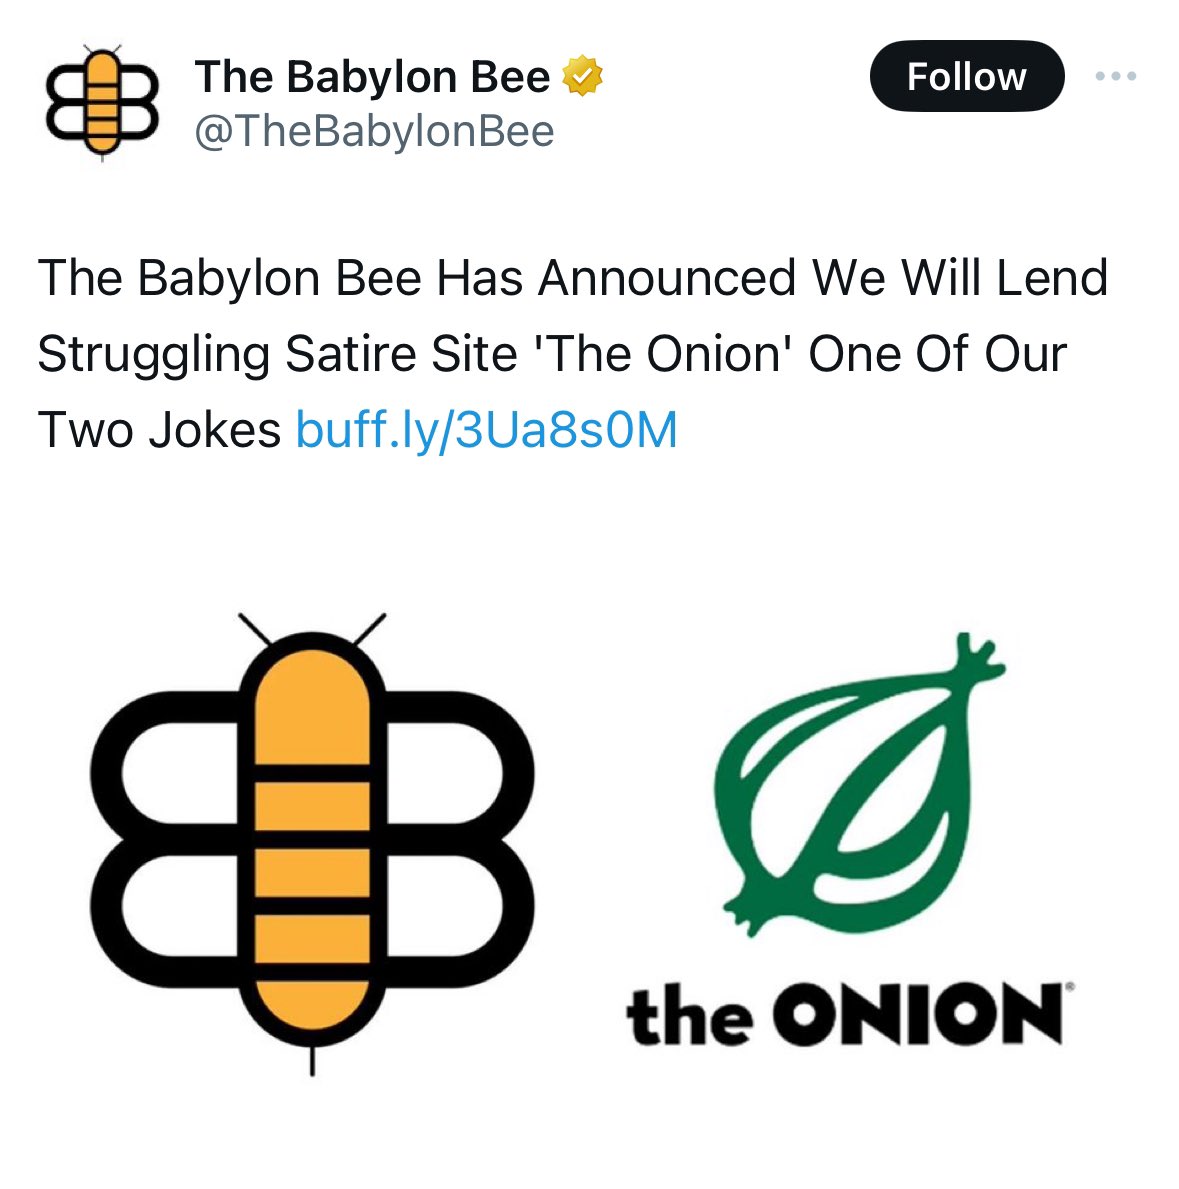 I am just as perplexed as you to report that The Babylon Bee has had several good jokes recently